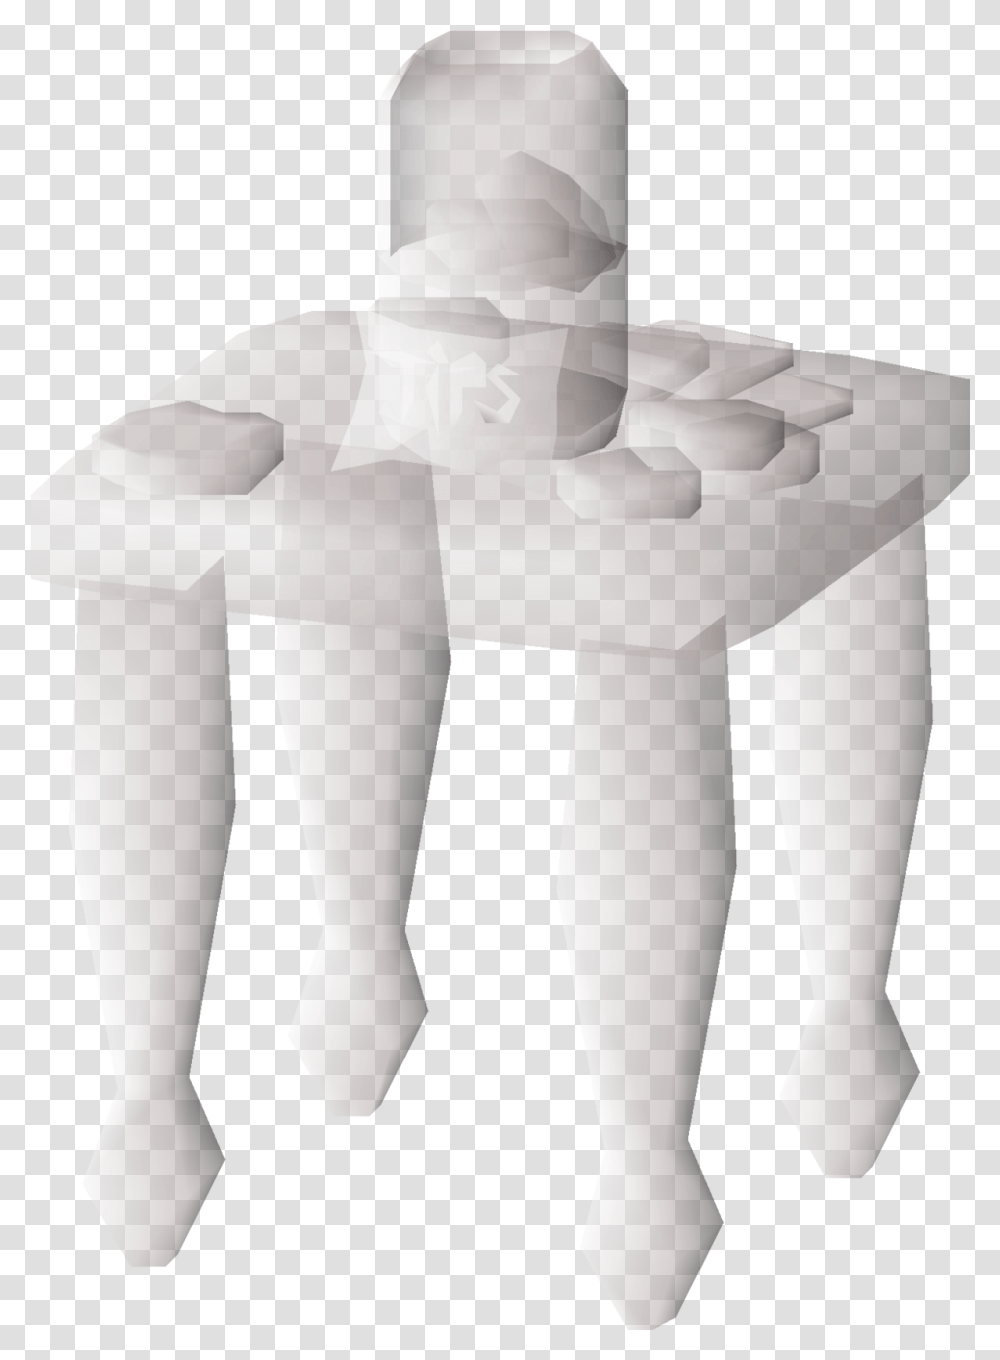 Tip Jar Space Picnic Table, Furniture, Chair, Architecture, Building Transparent Png